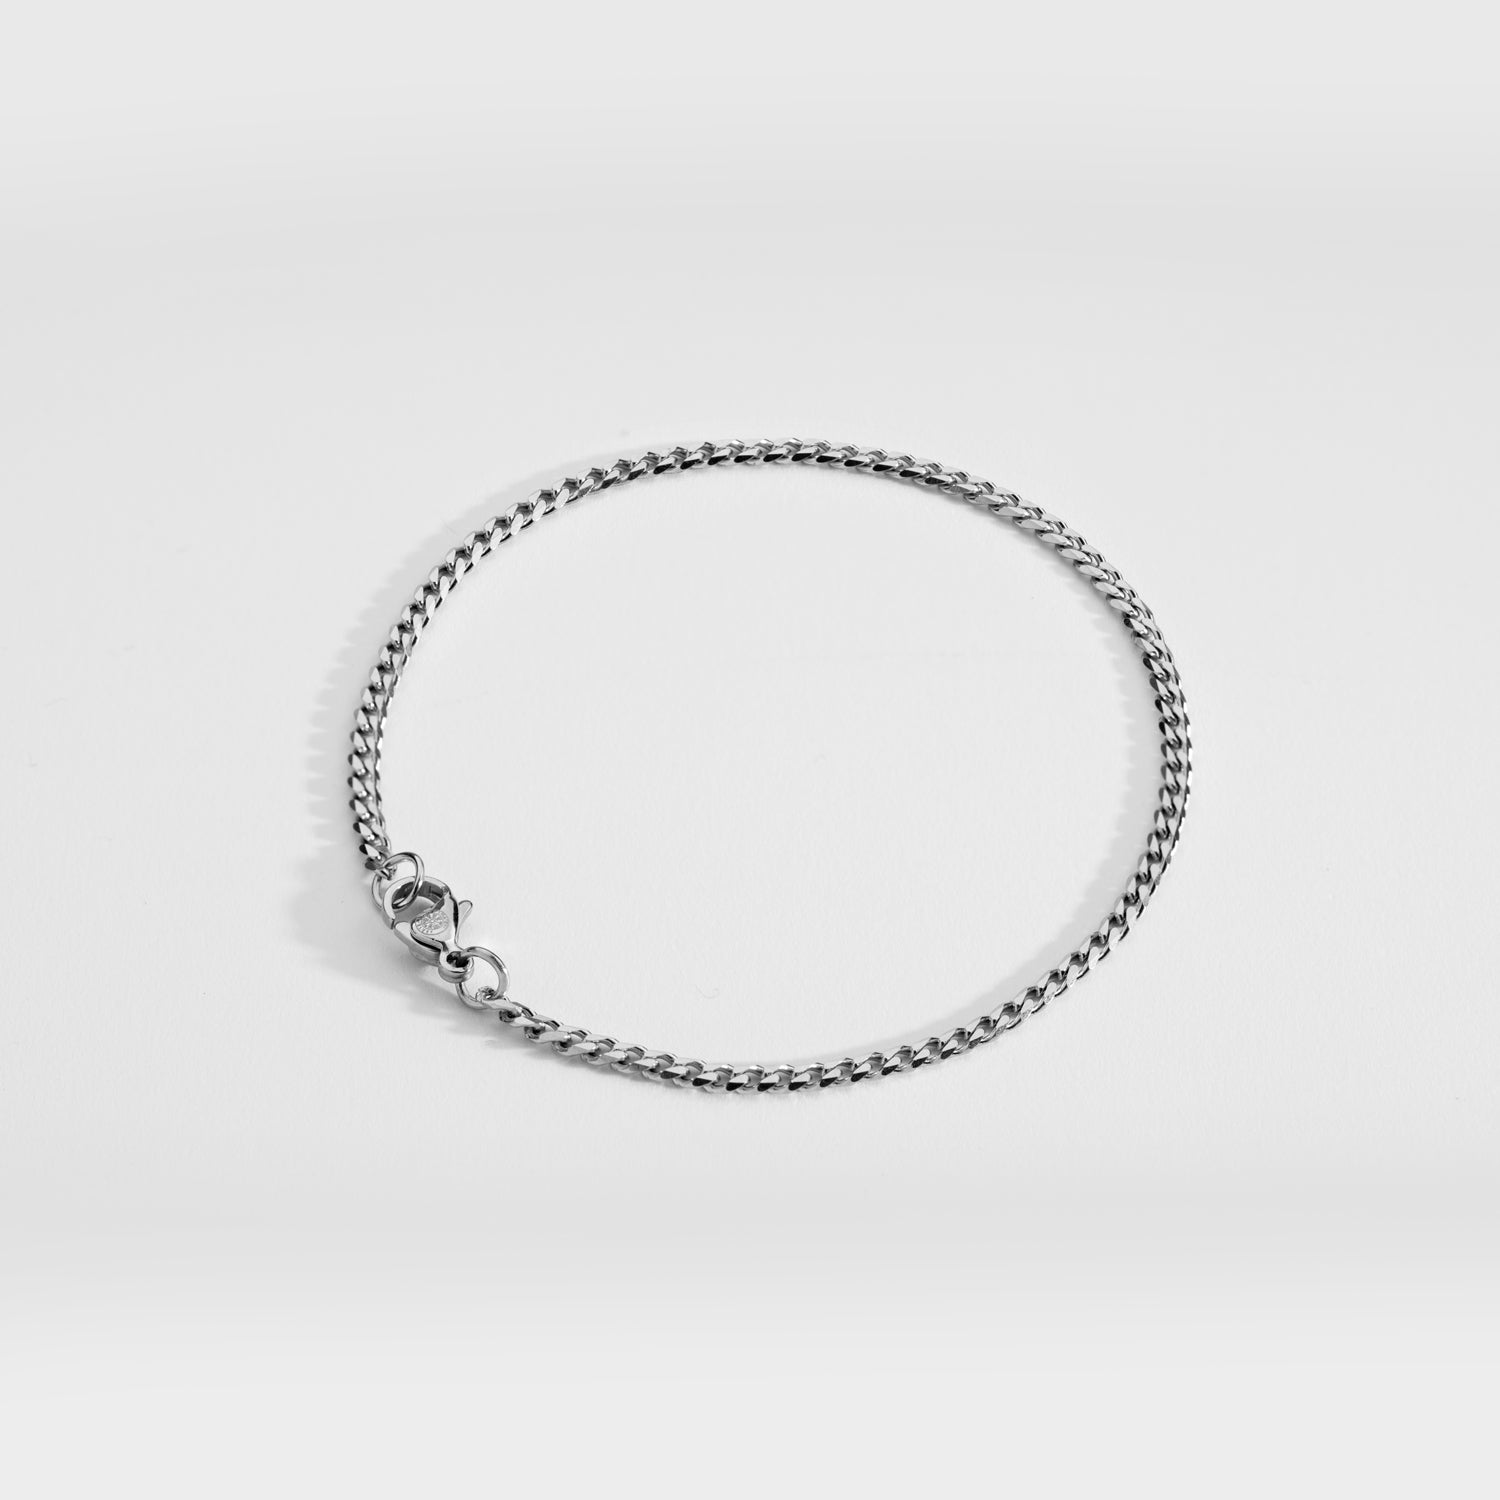 NL Minimal Sequence bracelet - Silver-toned